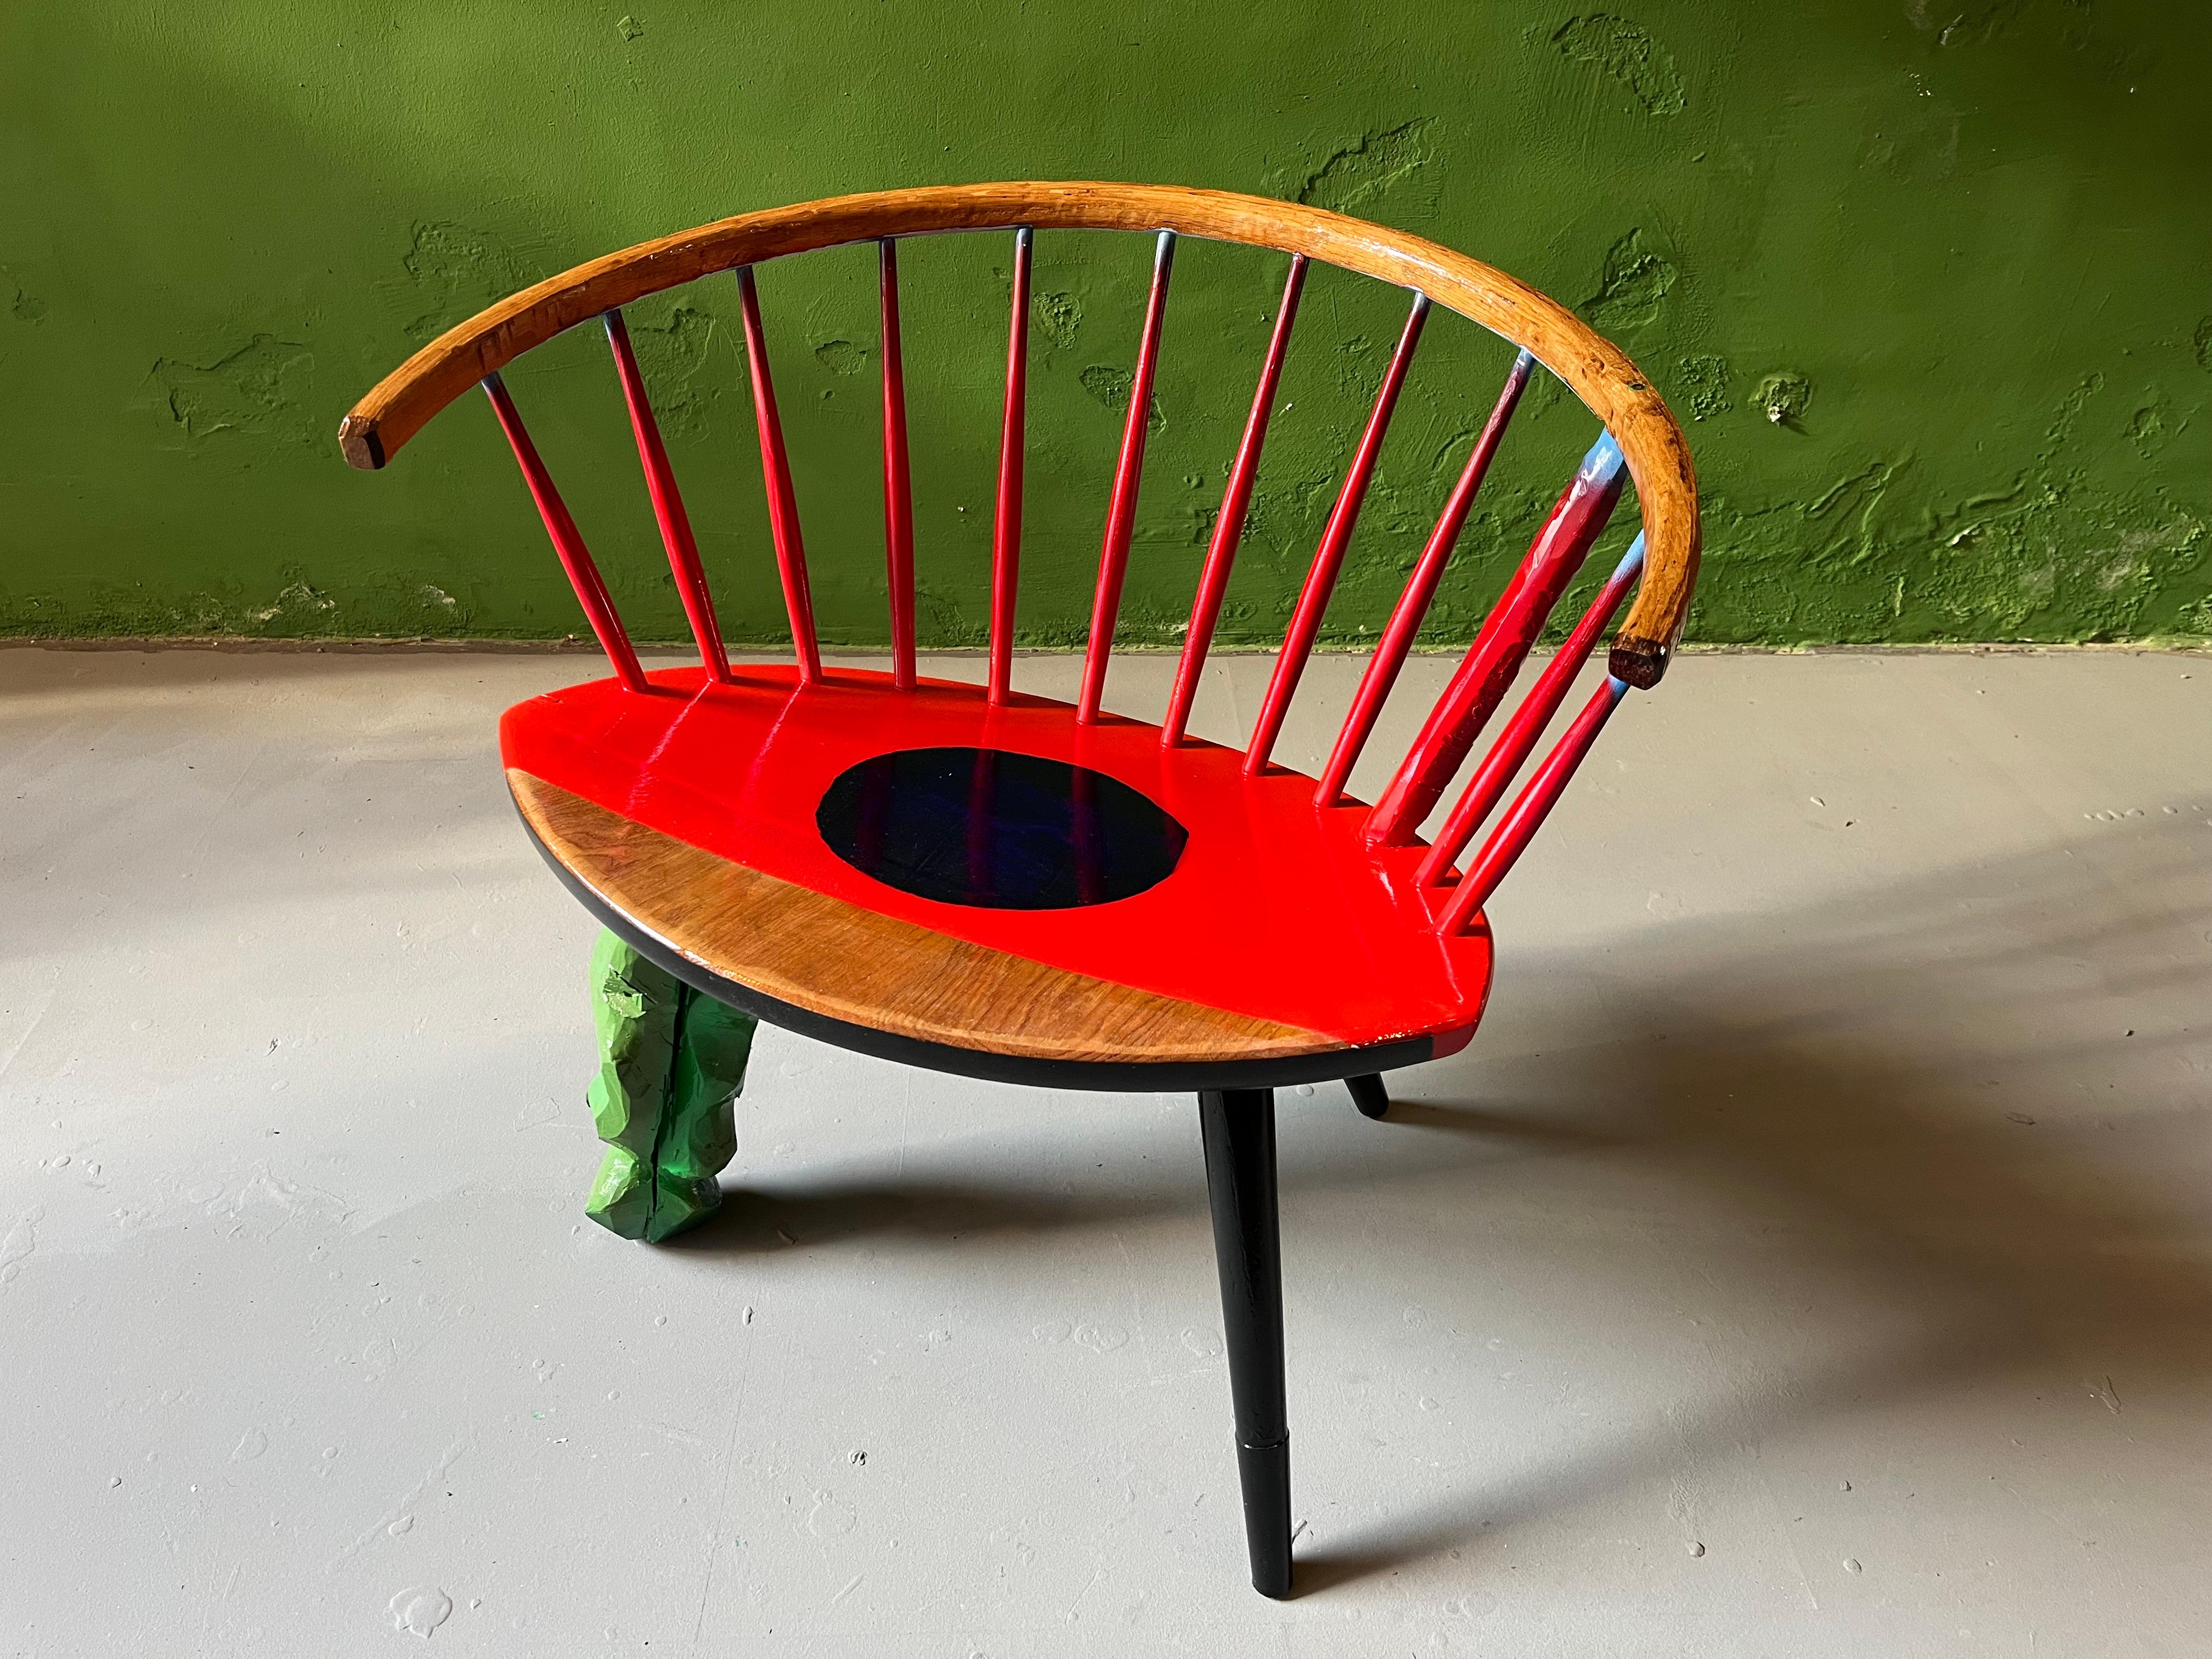 Yngve Ekströms Arka chair de-constructed, cutted, painted, spray-painted, multi-lacquered in high gloss by german fuctional artist Markus Friedrich Staab. This piece of mass production is made to be a one of a kind conversation piece und very